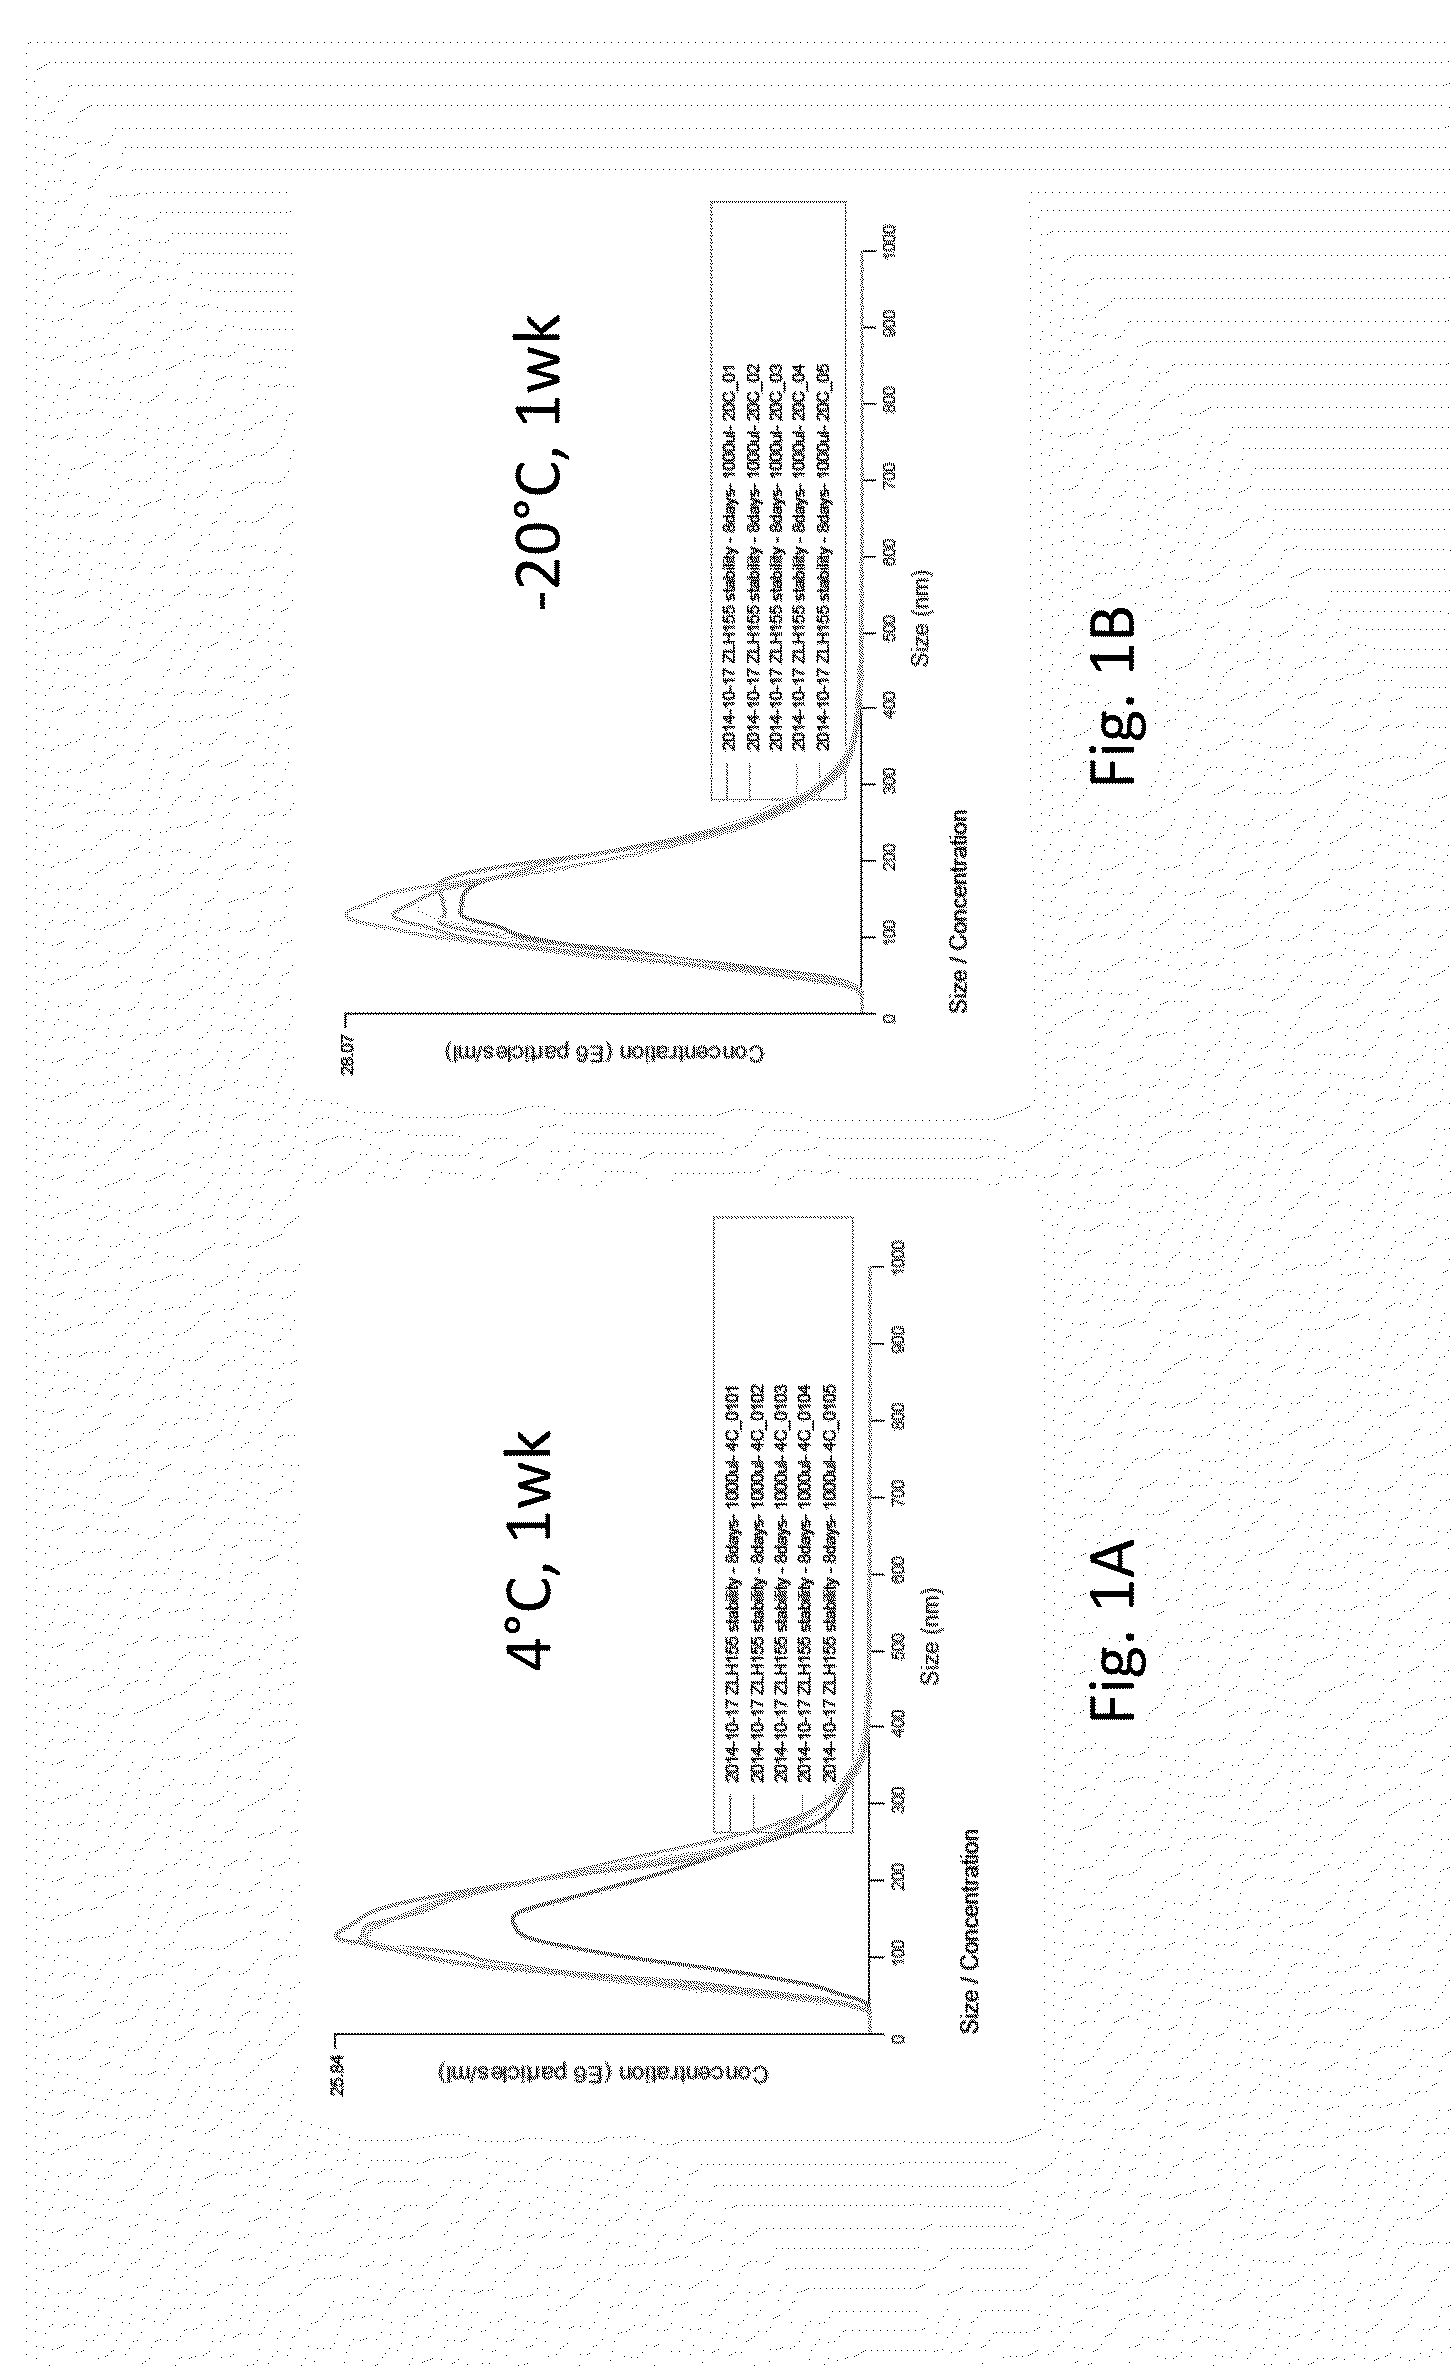 Processes for producing stable exosome formulations